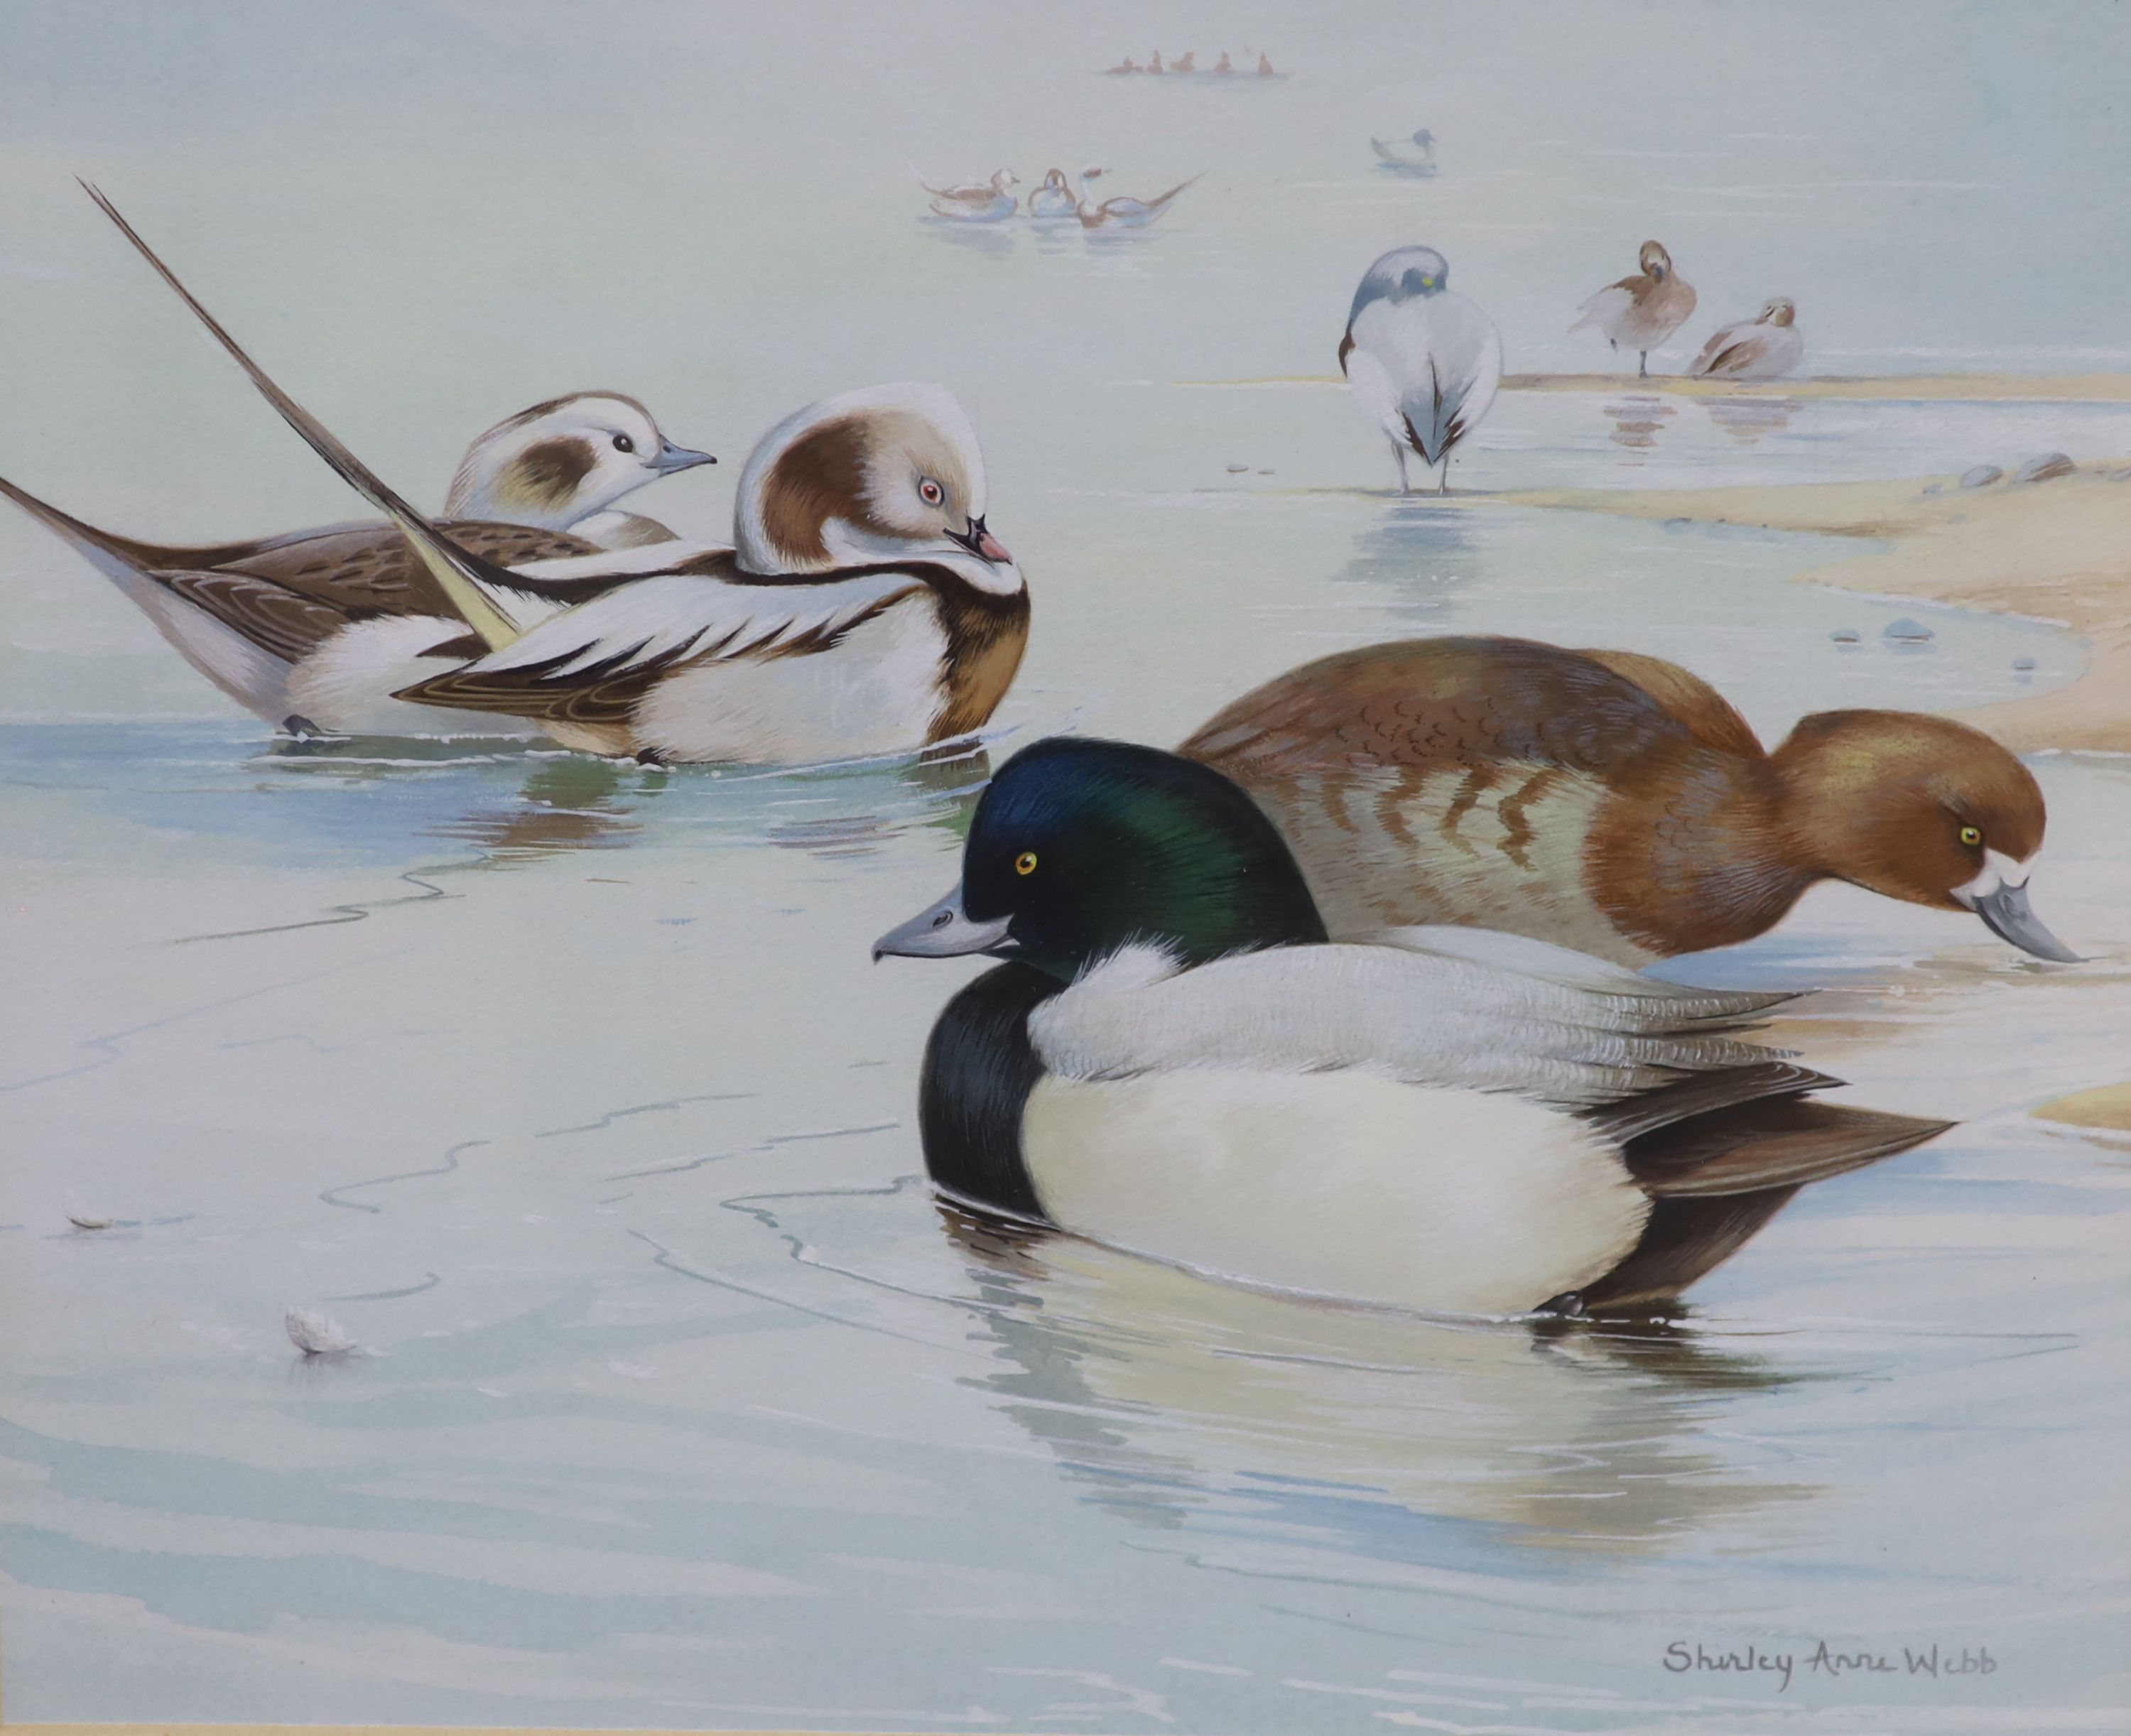 Shirley Anne Webb (20th century), watercolour and gouache on paper, Long Tailed and Scaup ducks by the shore, signed, 24.5 x 29.5cm